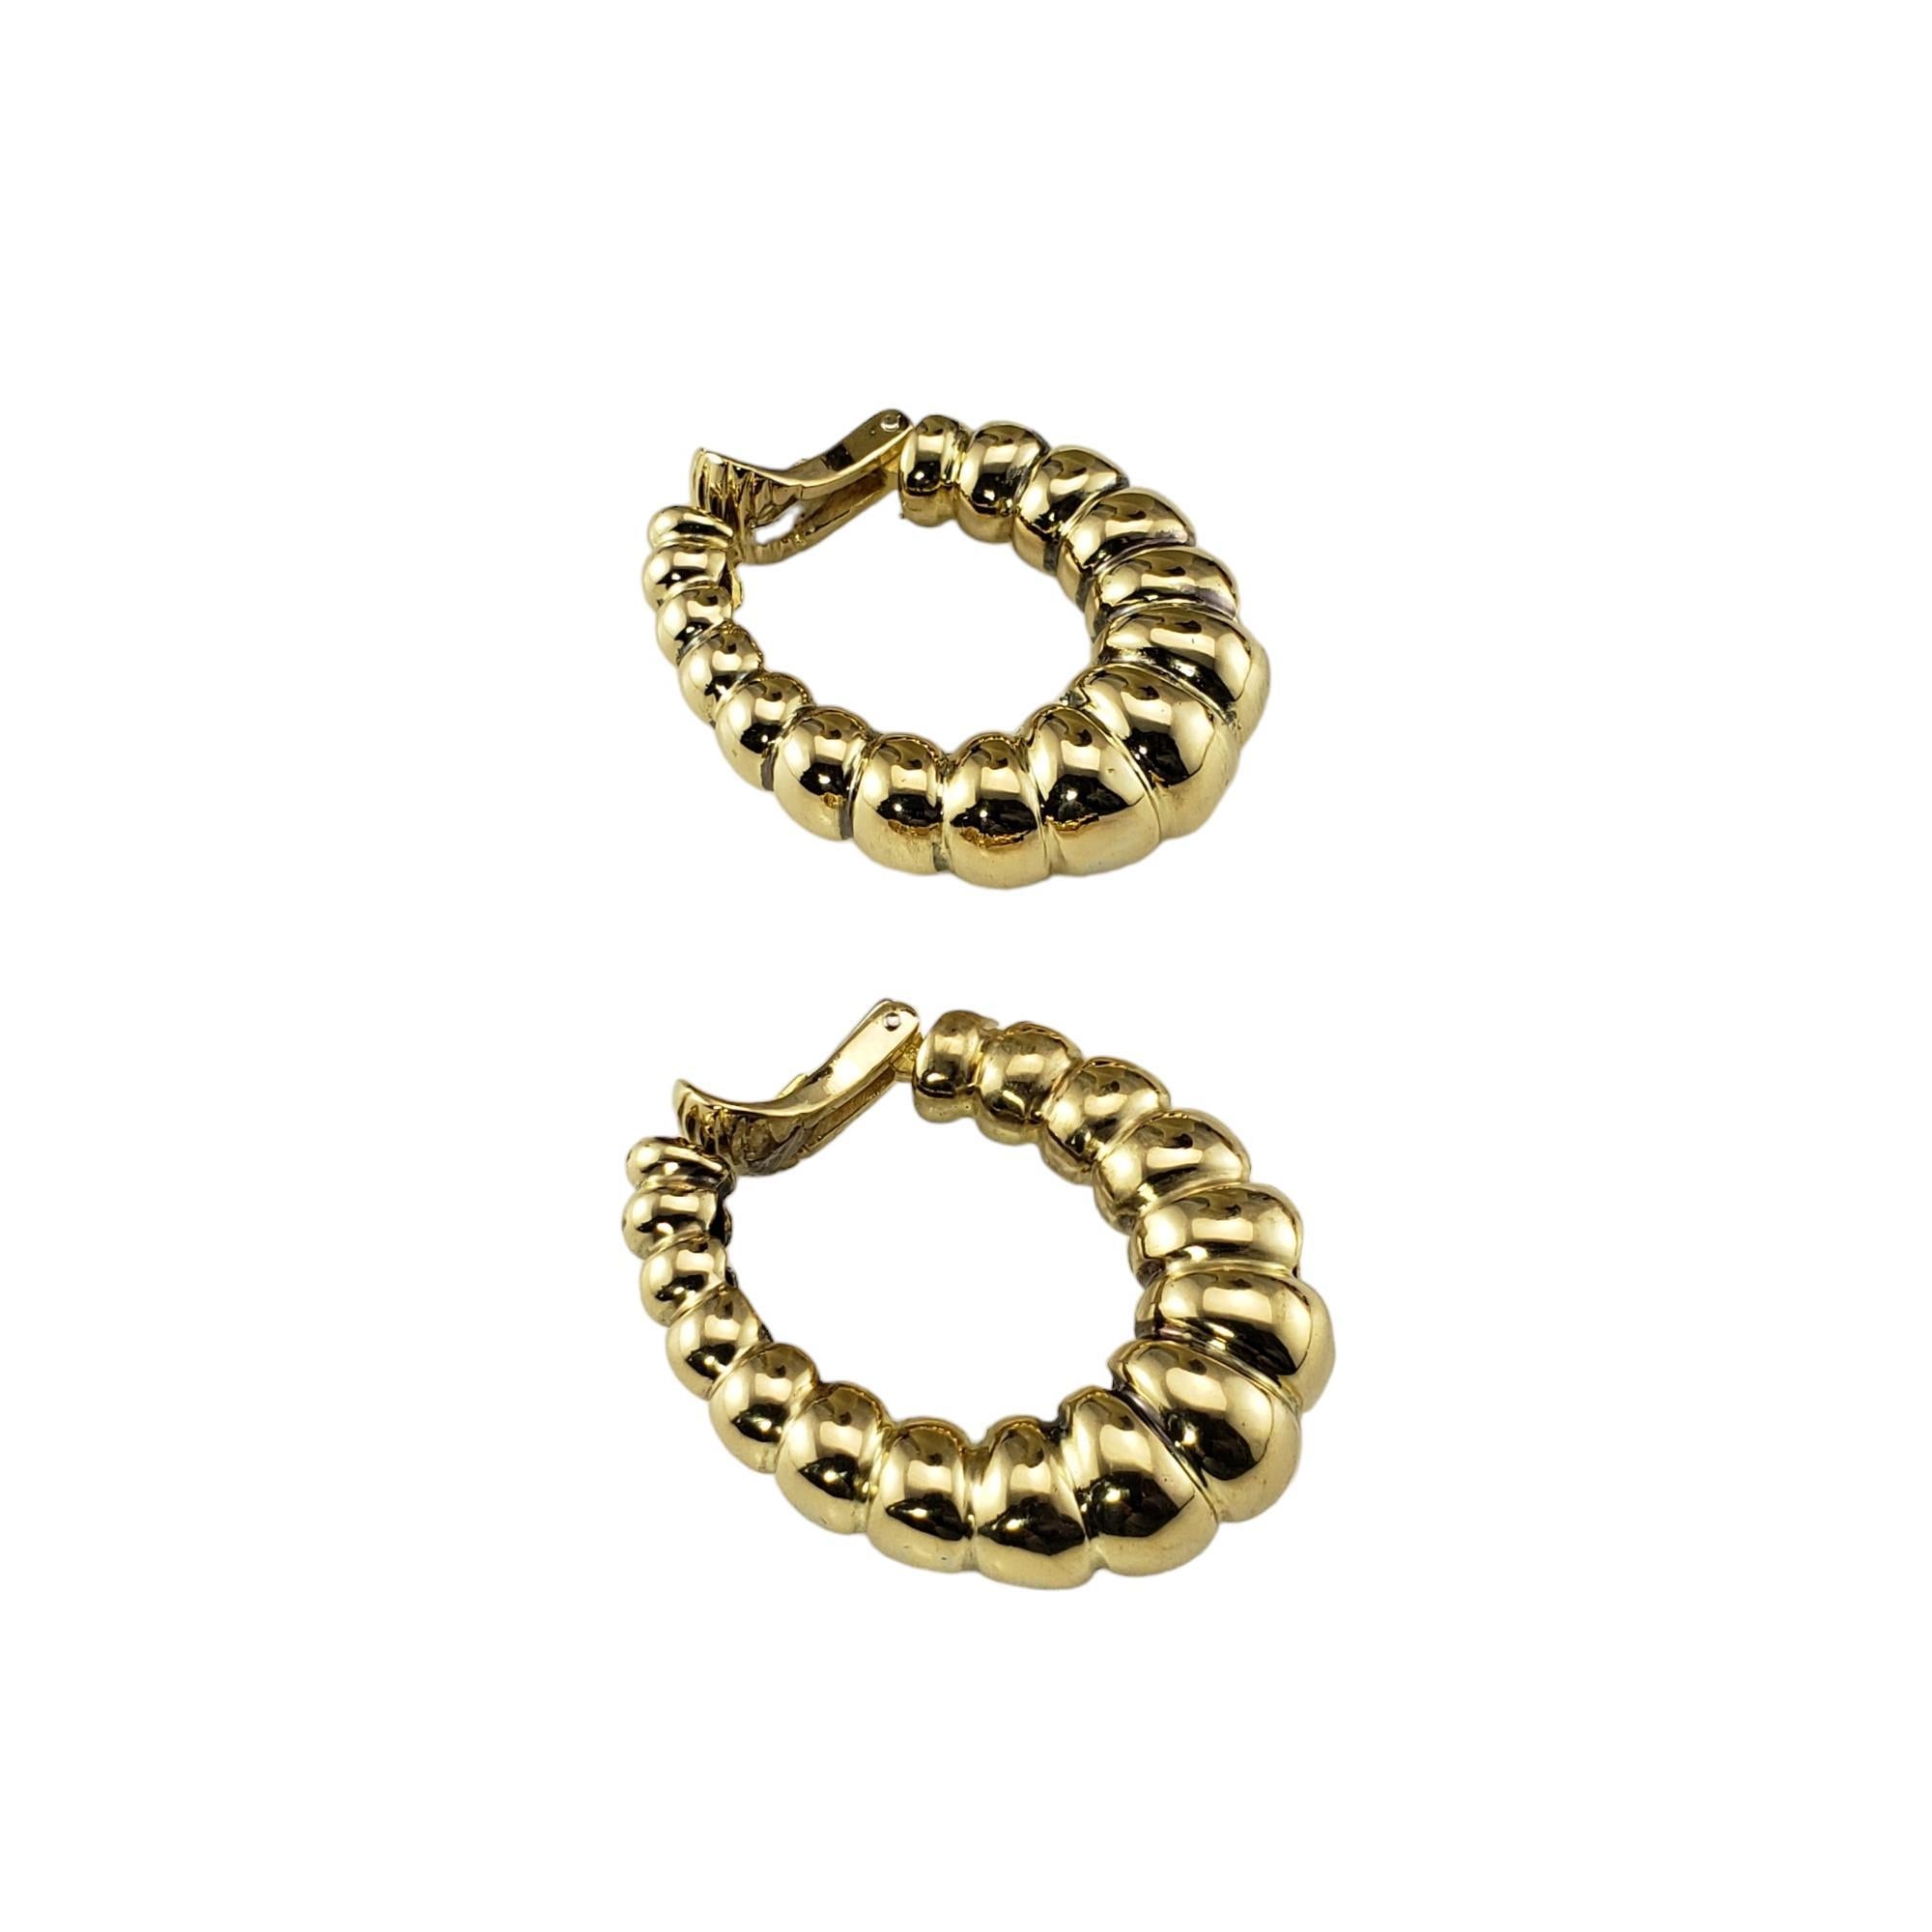 Cartier 18 Karat Yellow Gold Clip On Hoop Earrings

These elegant earrings by Cartier are crafted in meticulously detailed 18K yellow gold. 

Clip on closures.   

Width: 10 mm.

Size: 34 mm x 10 mm

Hallmark:  18K Cartier

Weight: 14.5 dwt./ 22.5